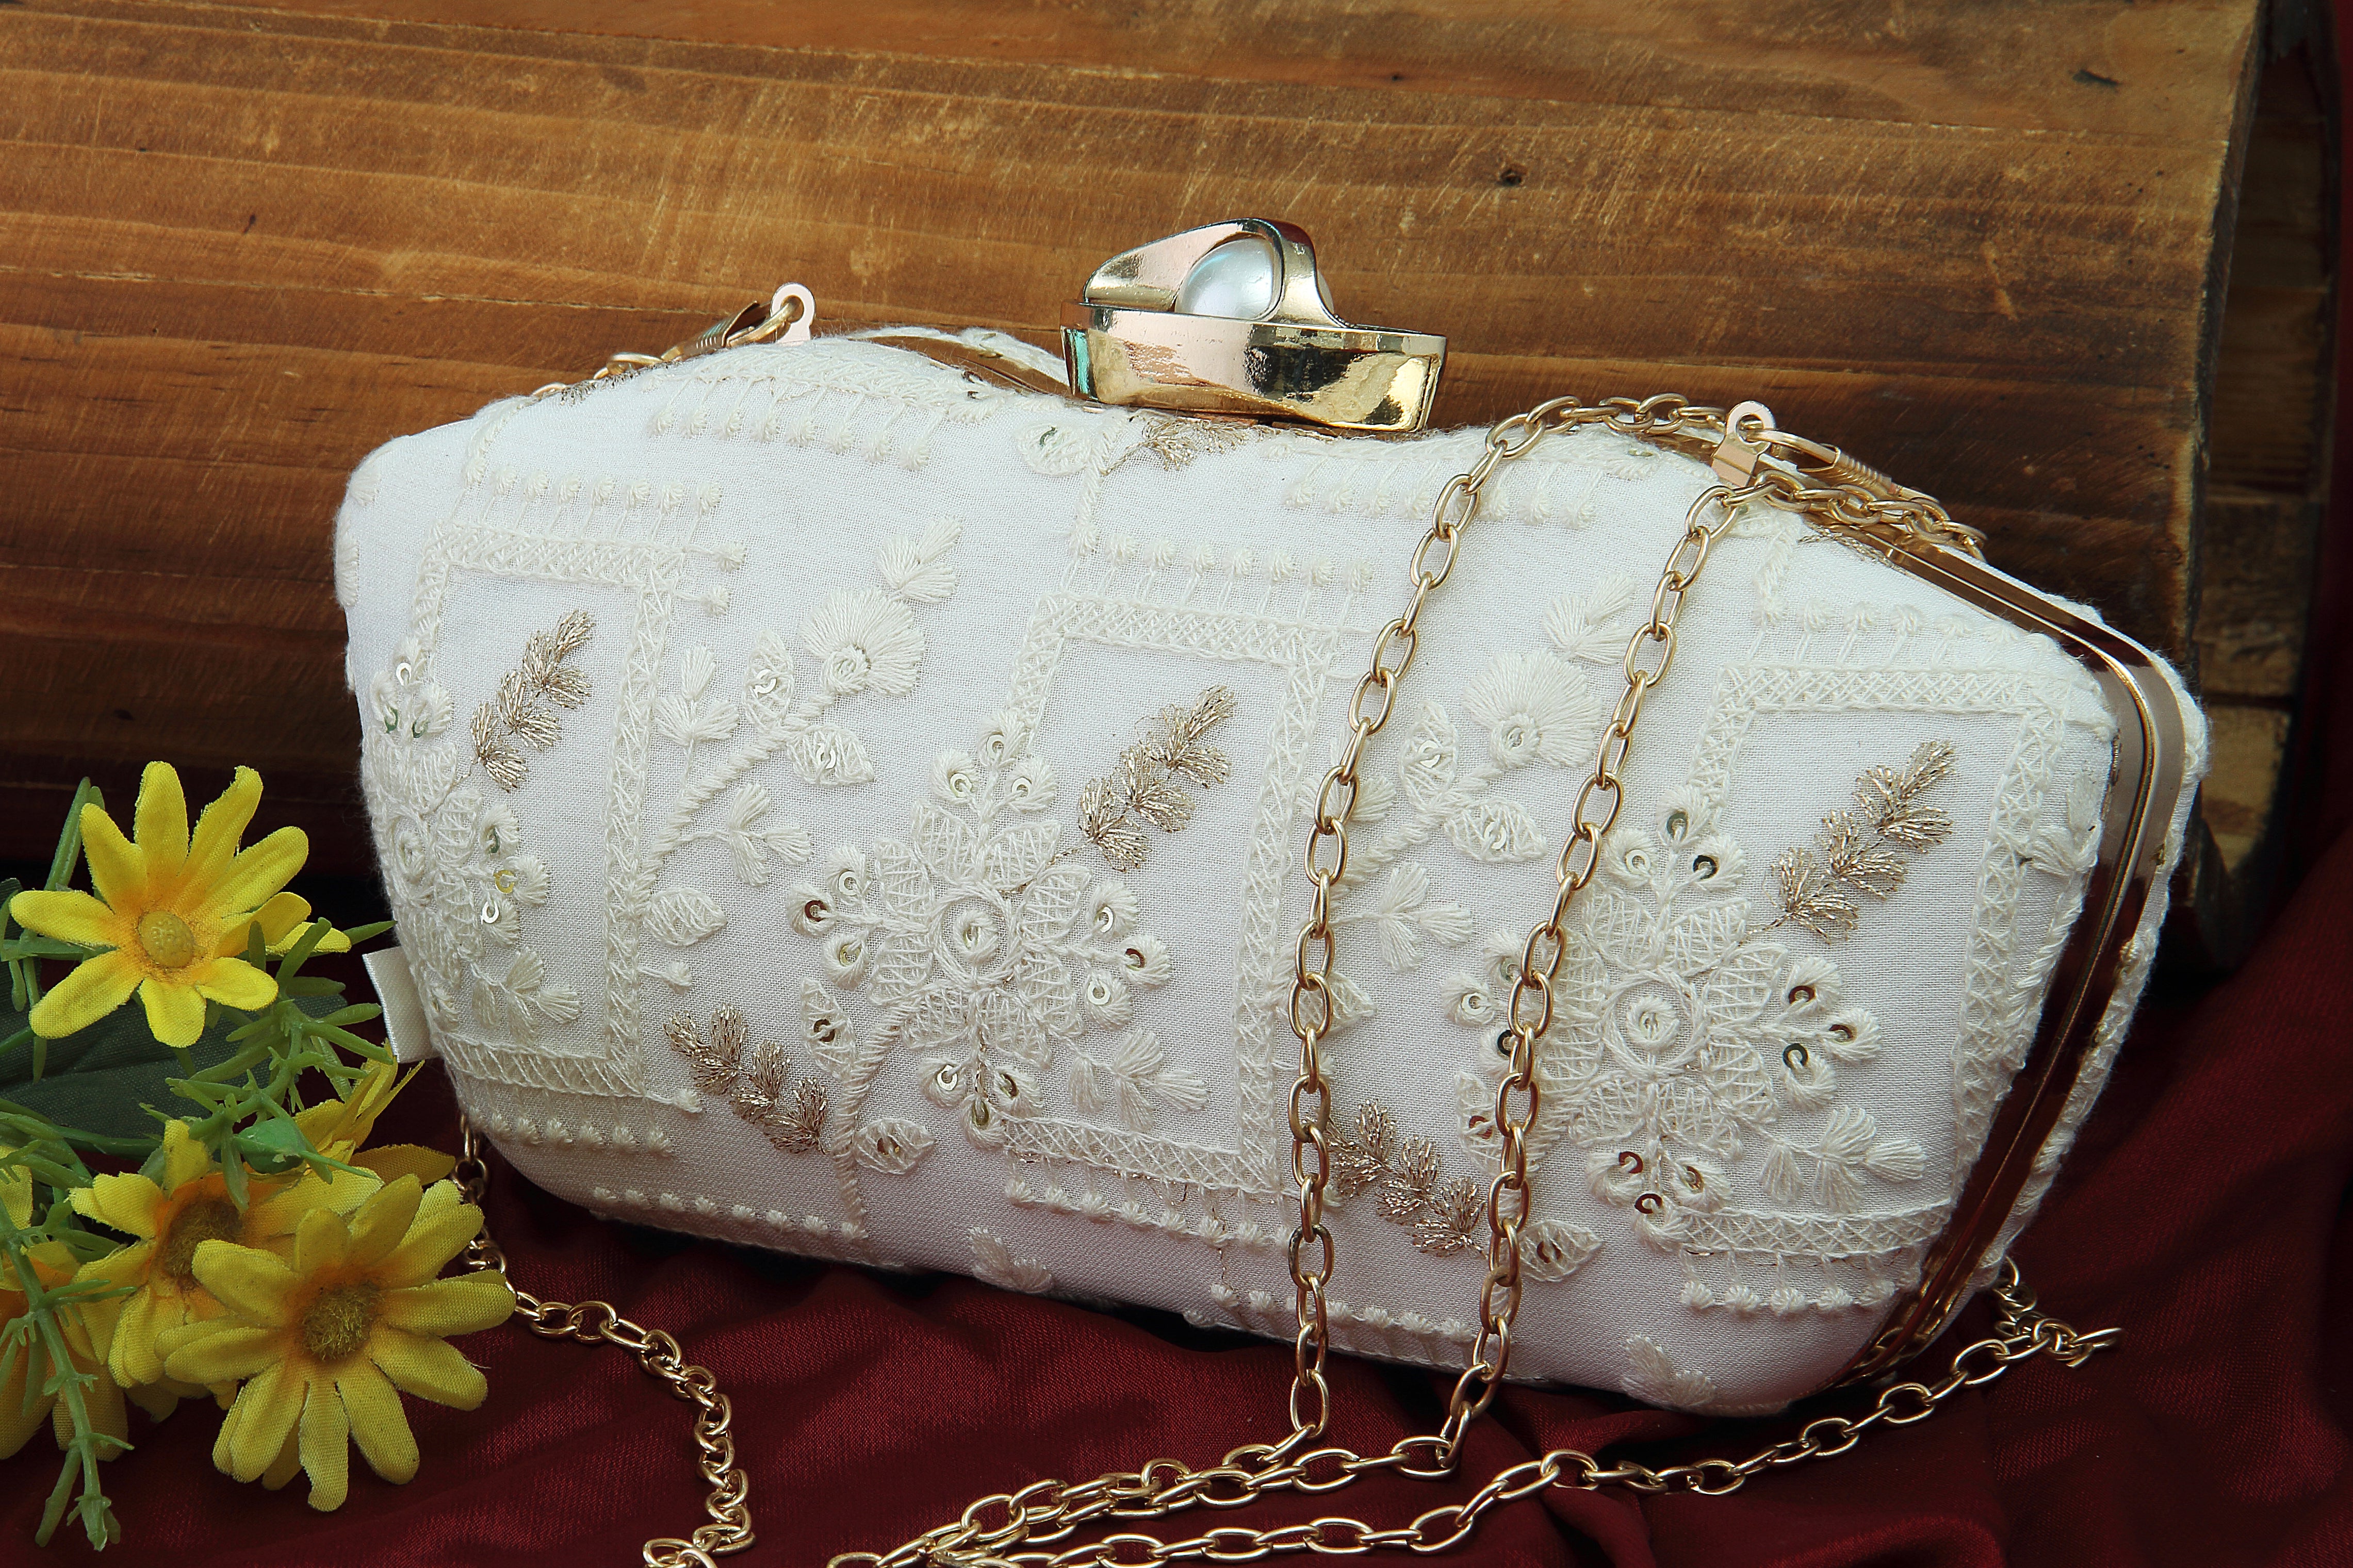 Saadgi embroidered white designer clutch bag with sling